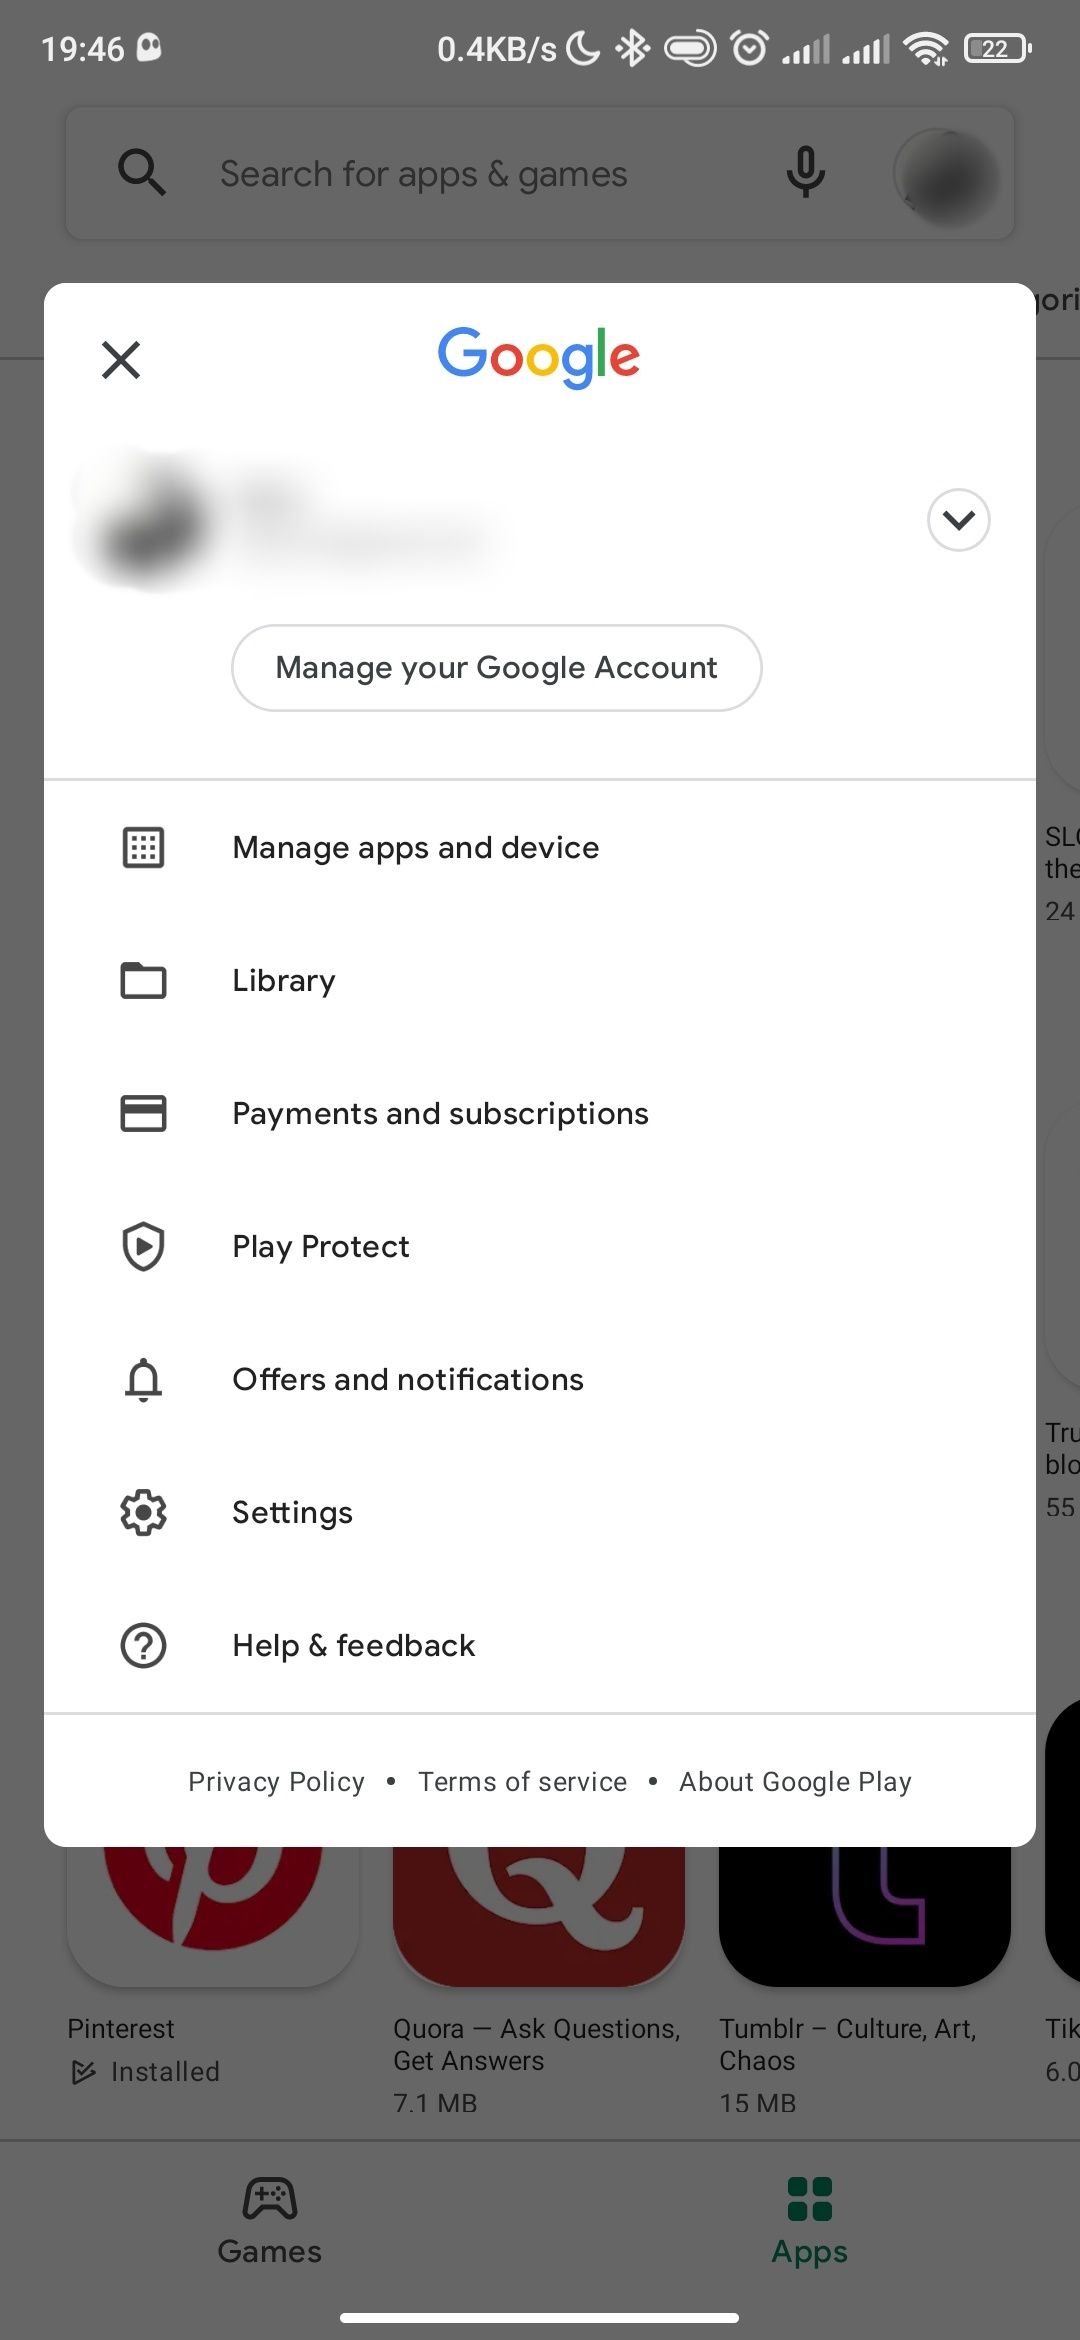 Google Play Store menu on an Android device